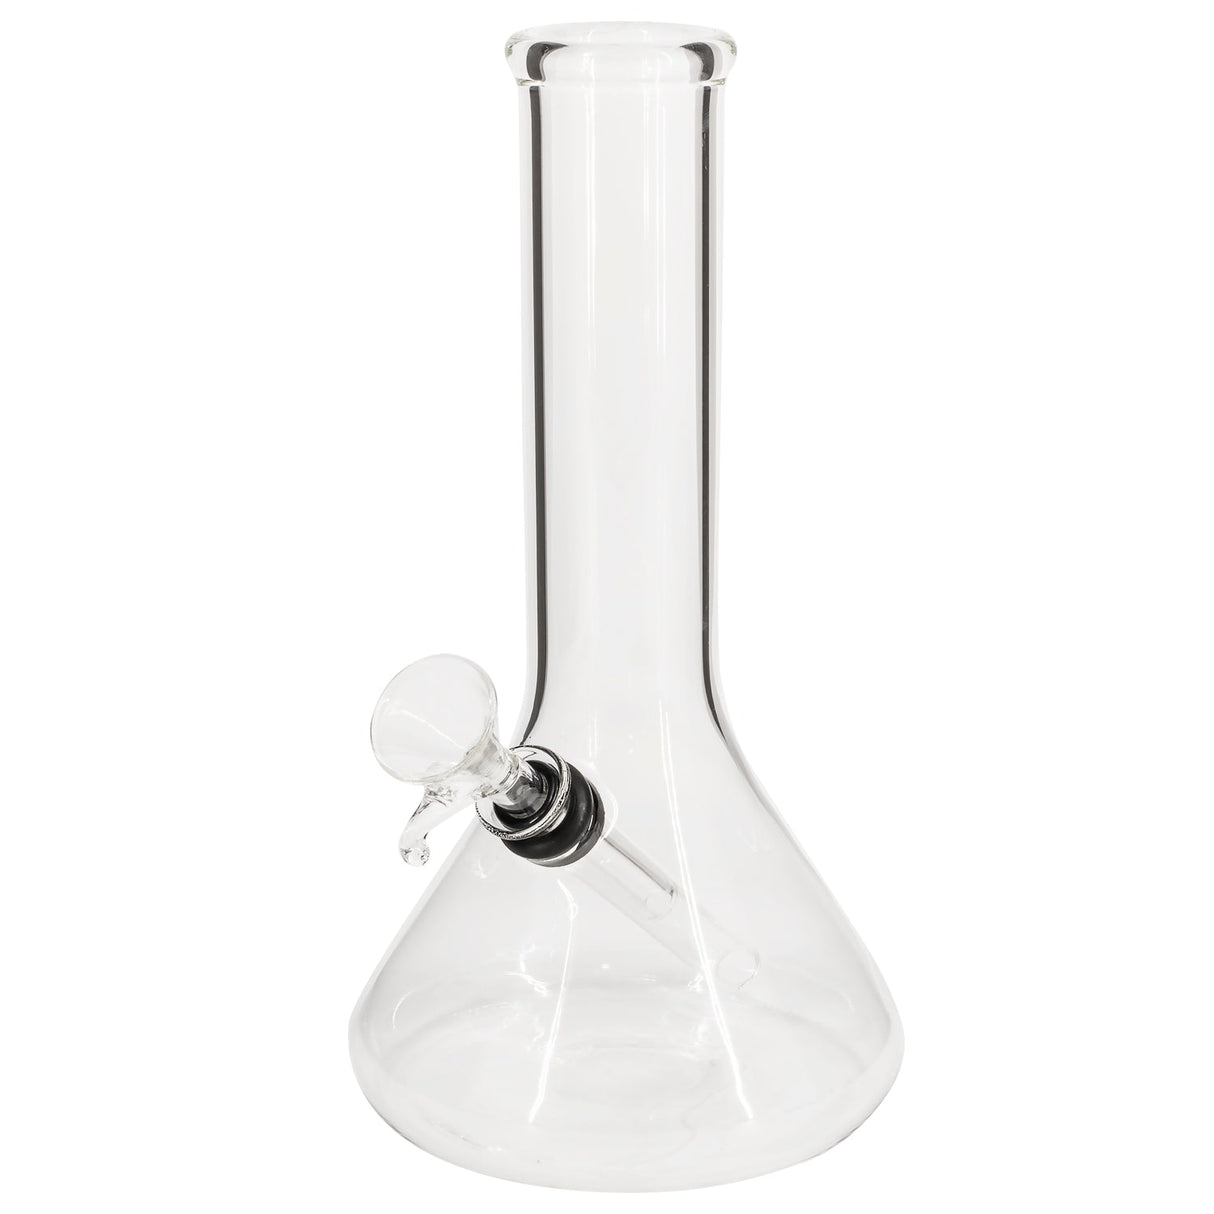 LA Pipes Thick Glass Beaker Base Bong with Grommet Joint, 45 Degree Angle, Front View